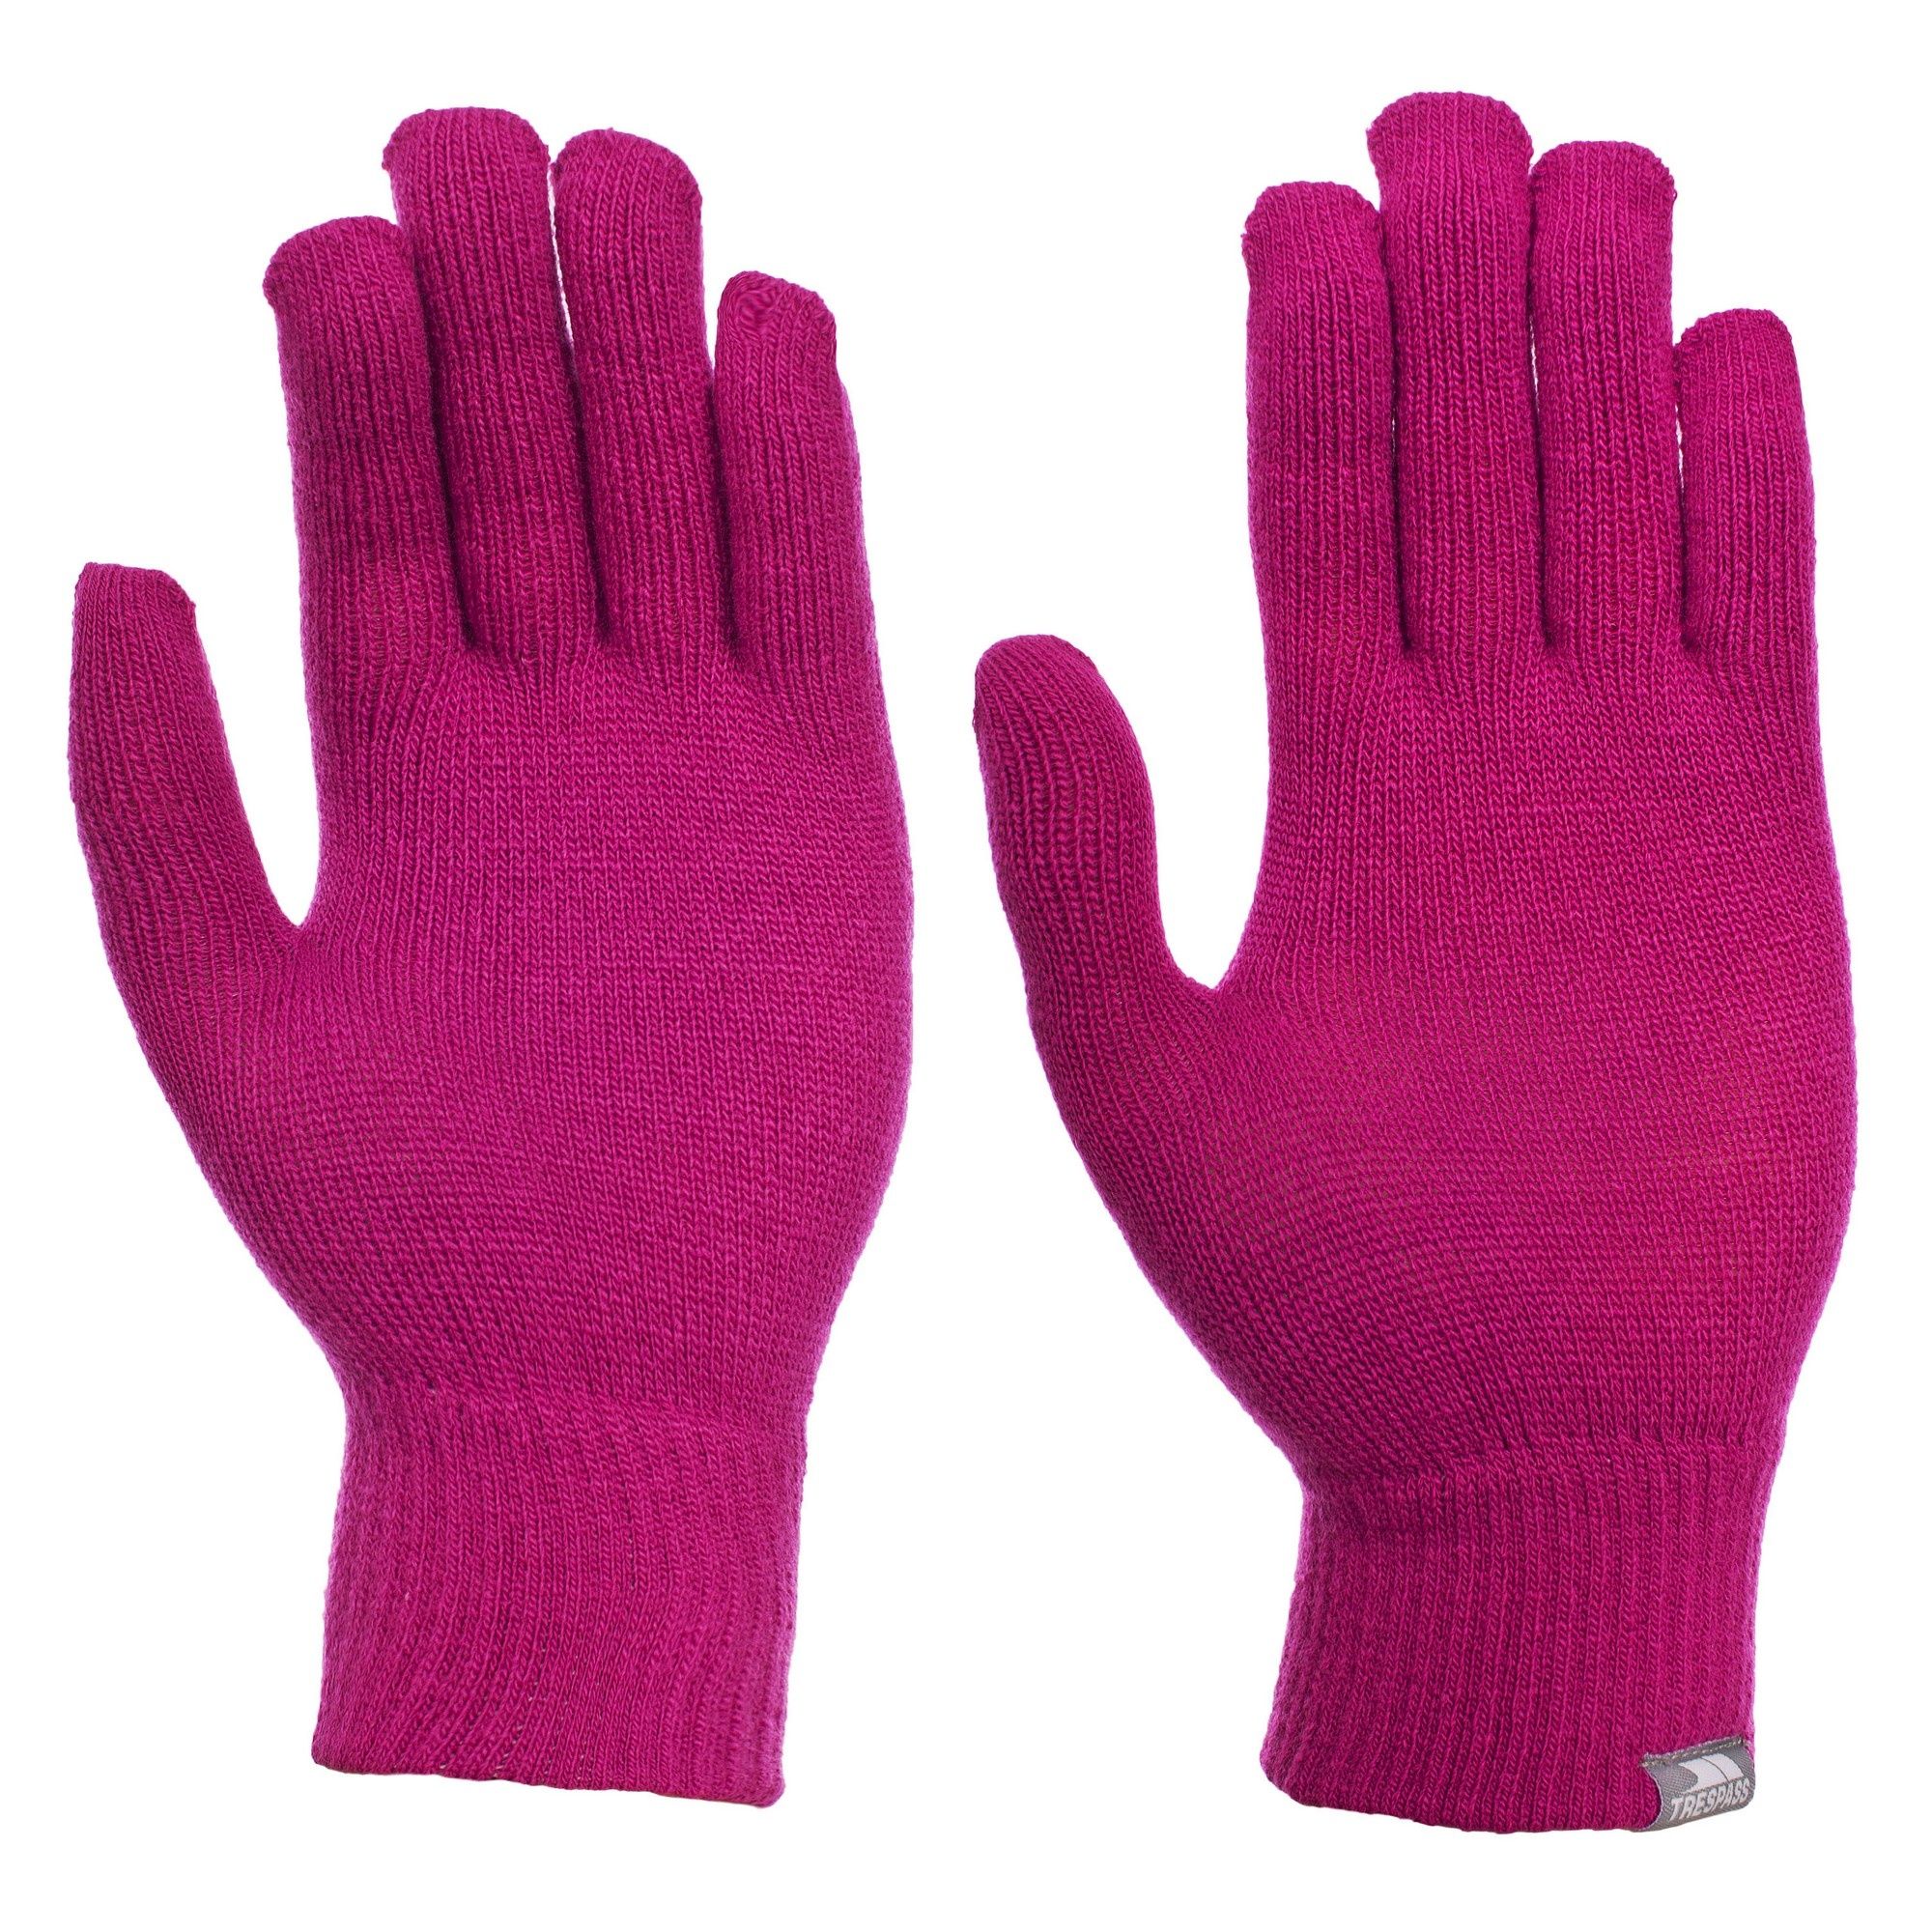 Knitted gloves. Stretches to fit all sizes. 85% acrylic 15% elastane.